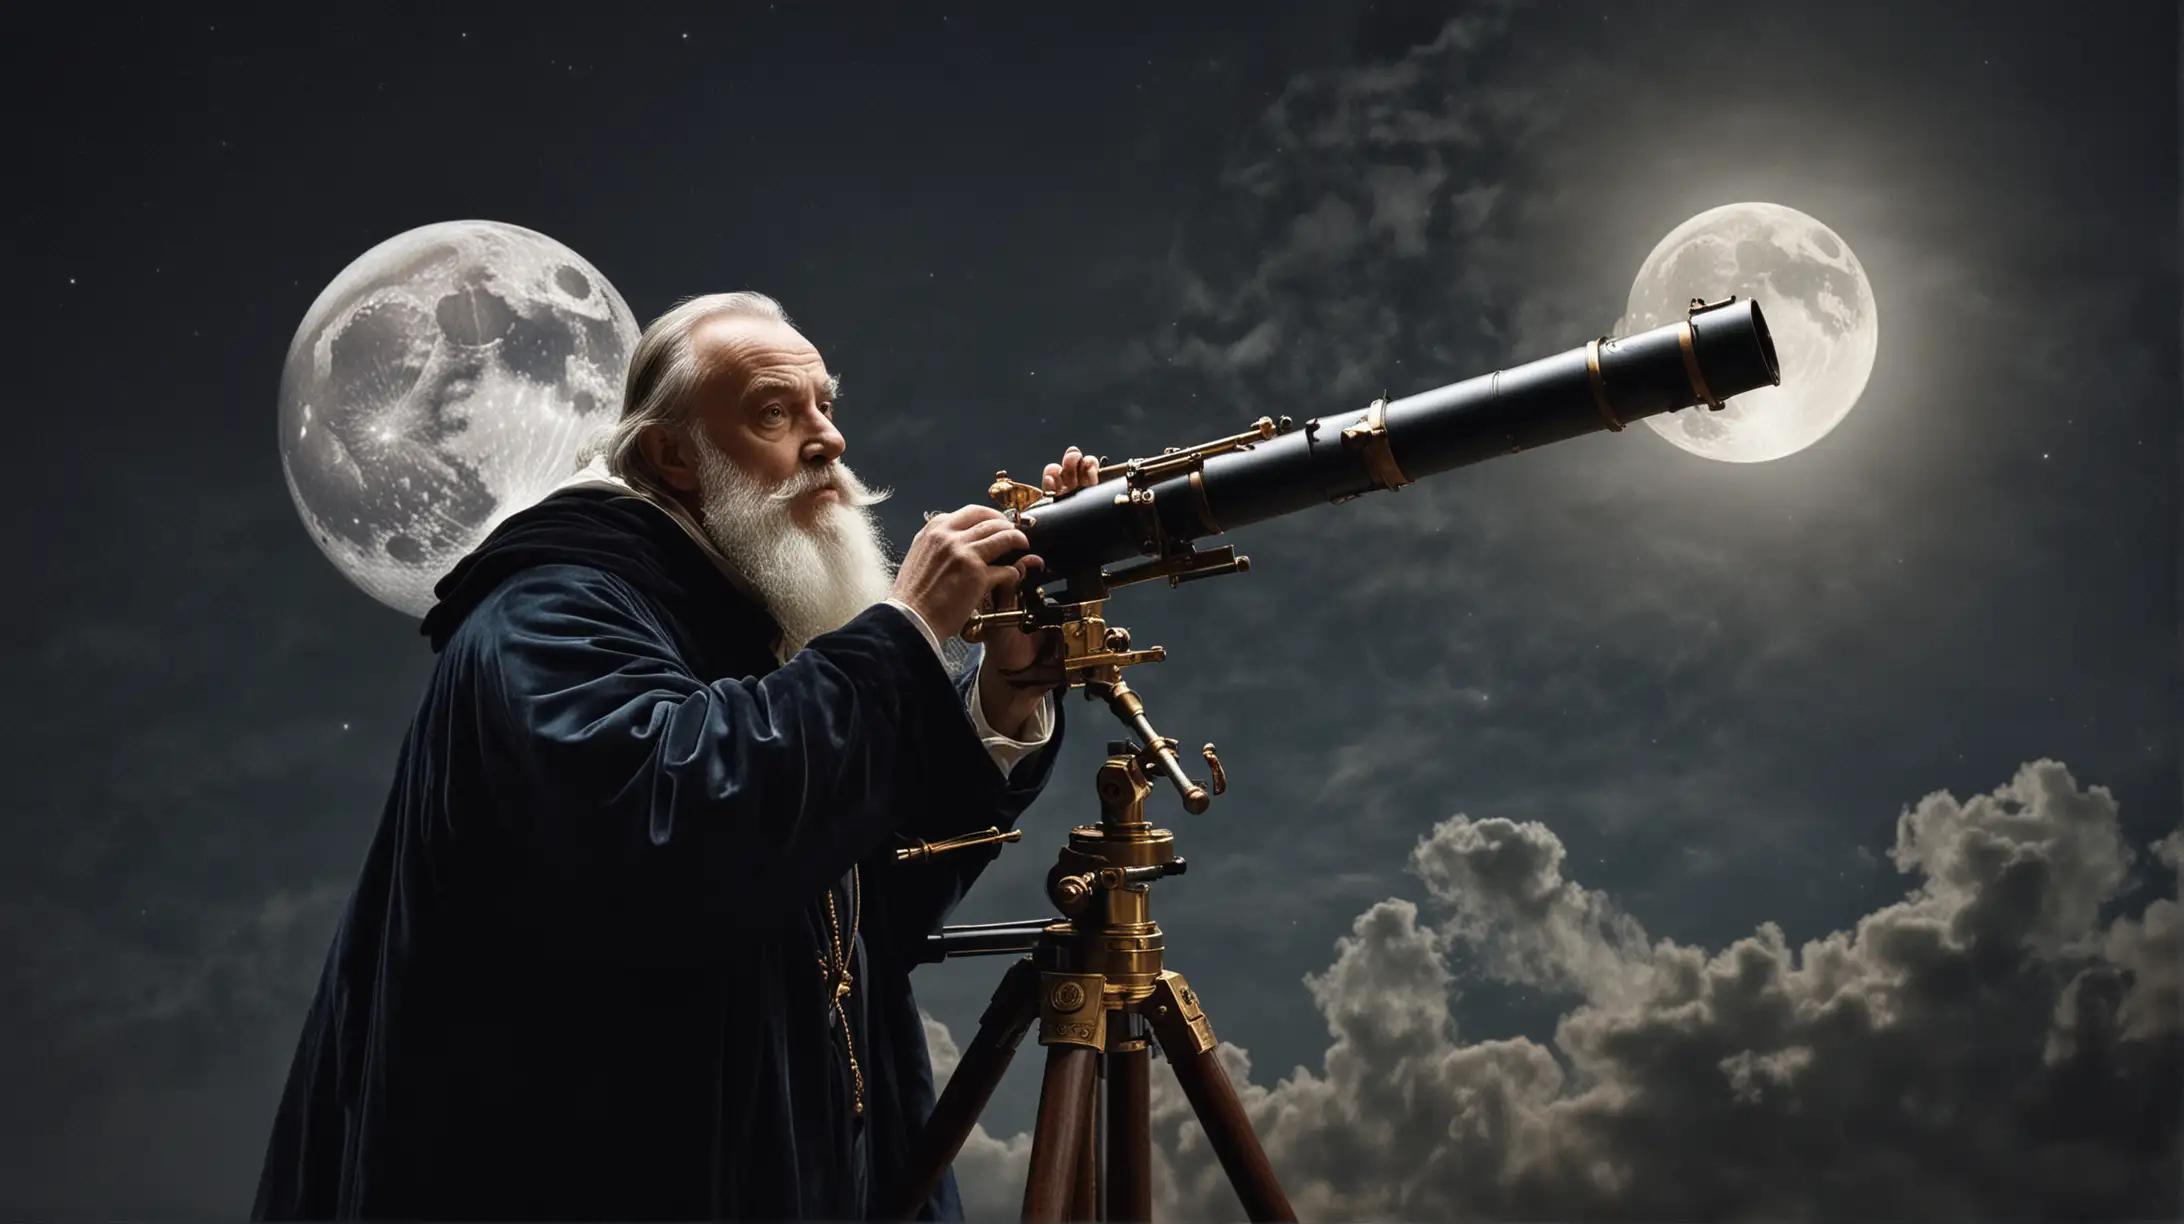 Galileo Galilei looking at the moon with his telescope